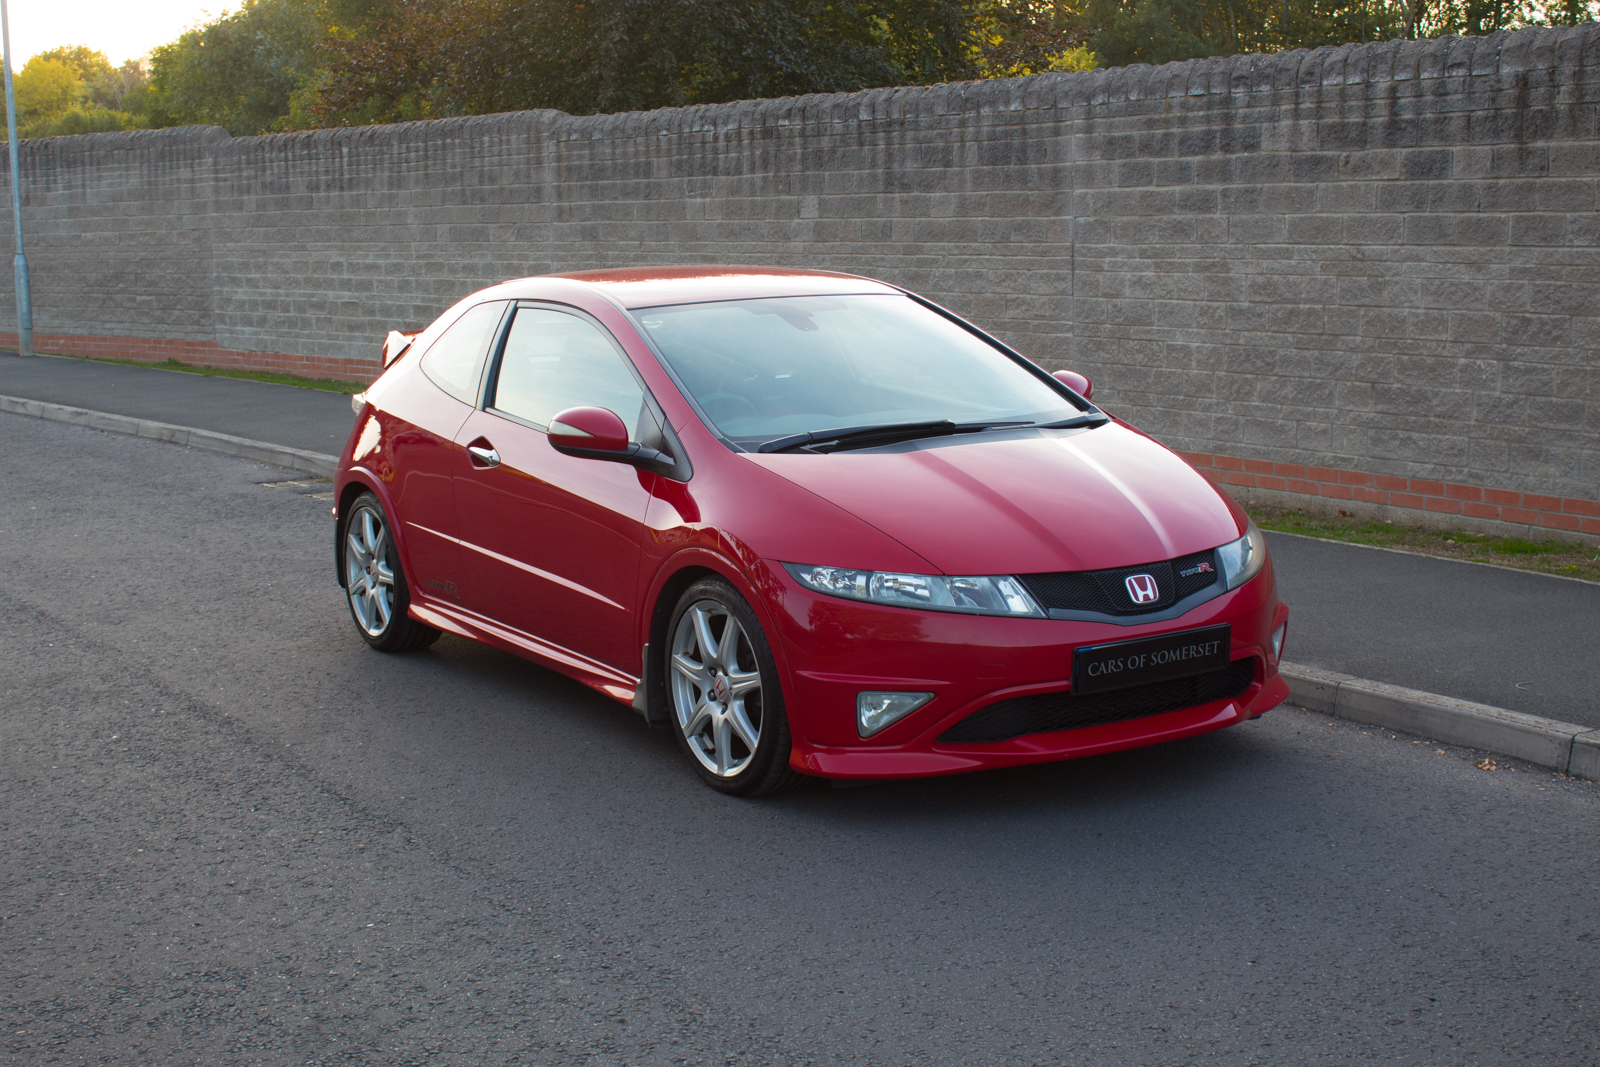 Sold 07 Honda Civic Type R Gt Fn2 Cars Of Somerset